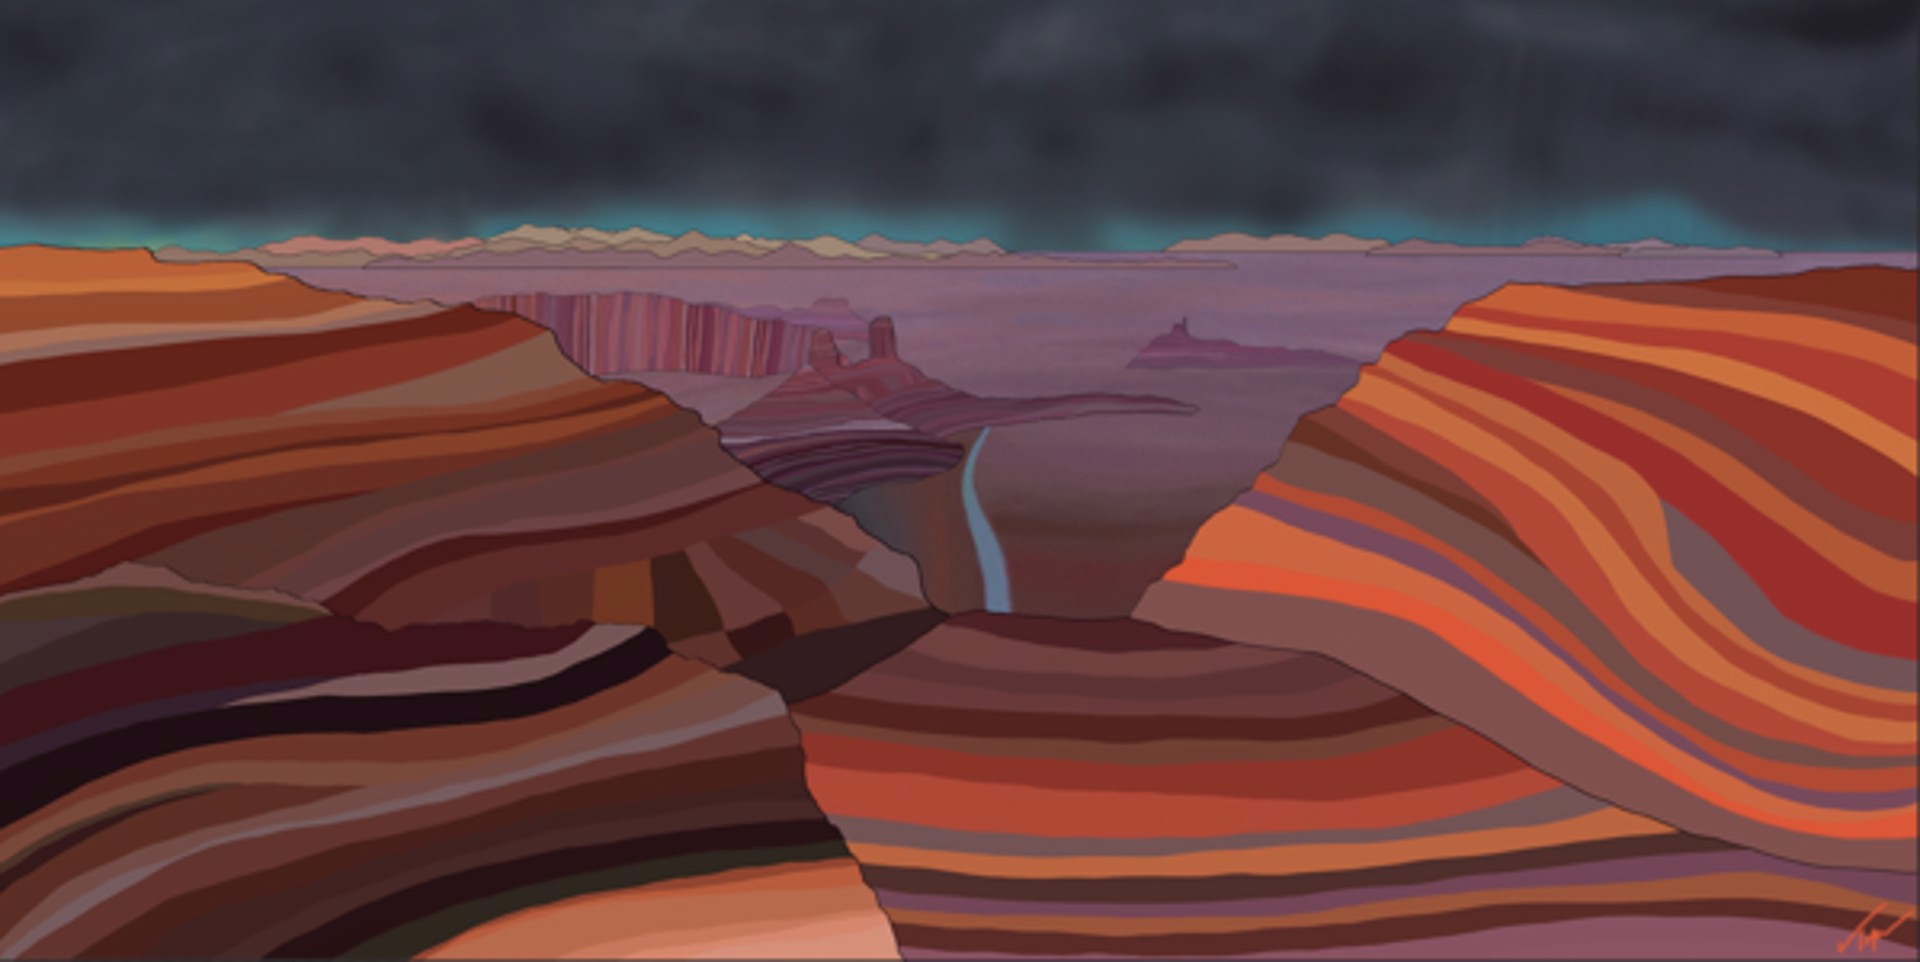 Canyonlands (Original) by Topher Straus